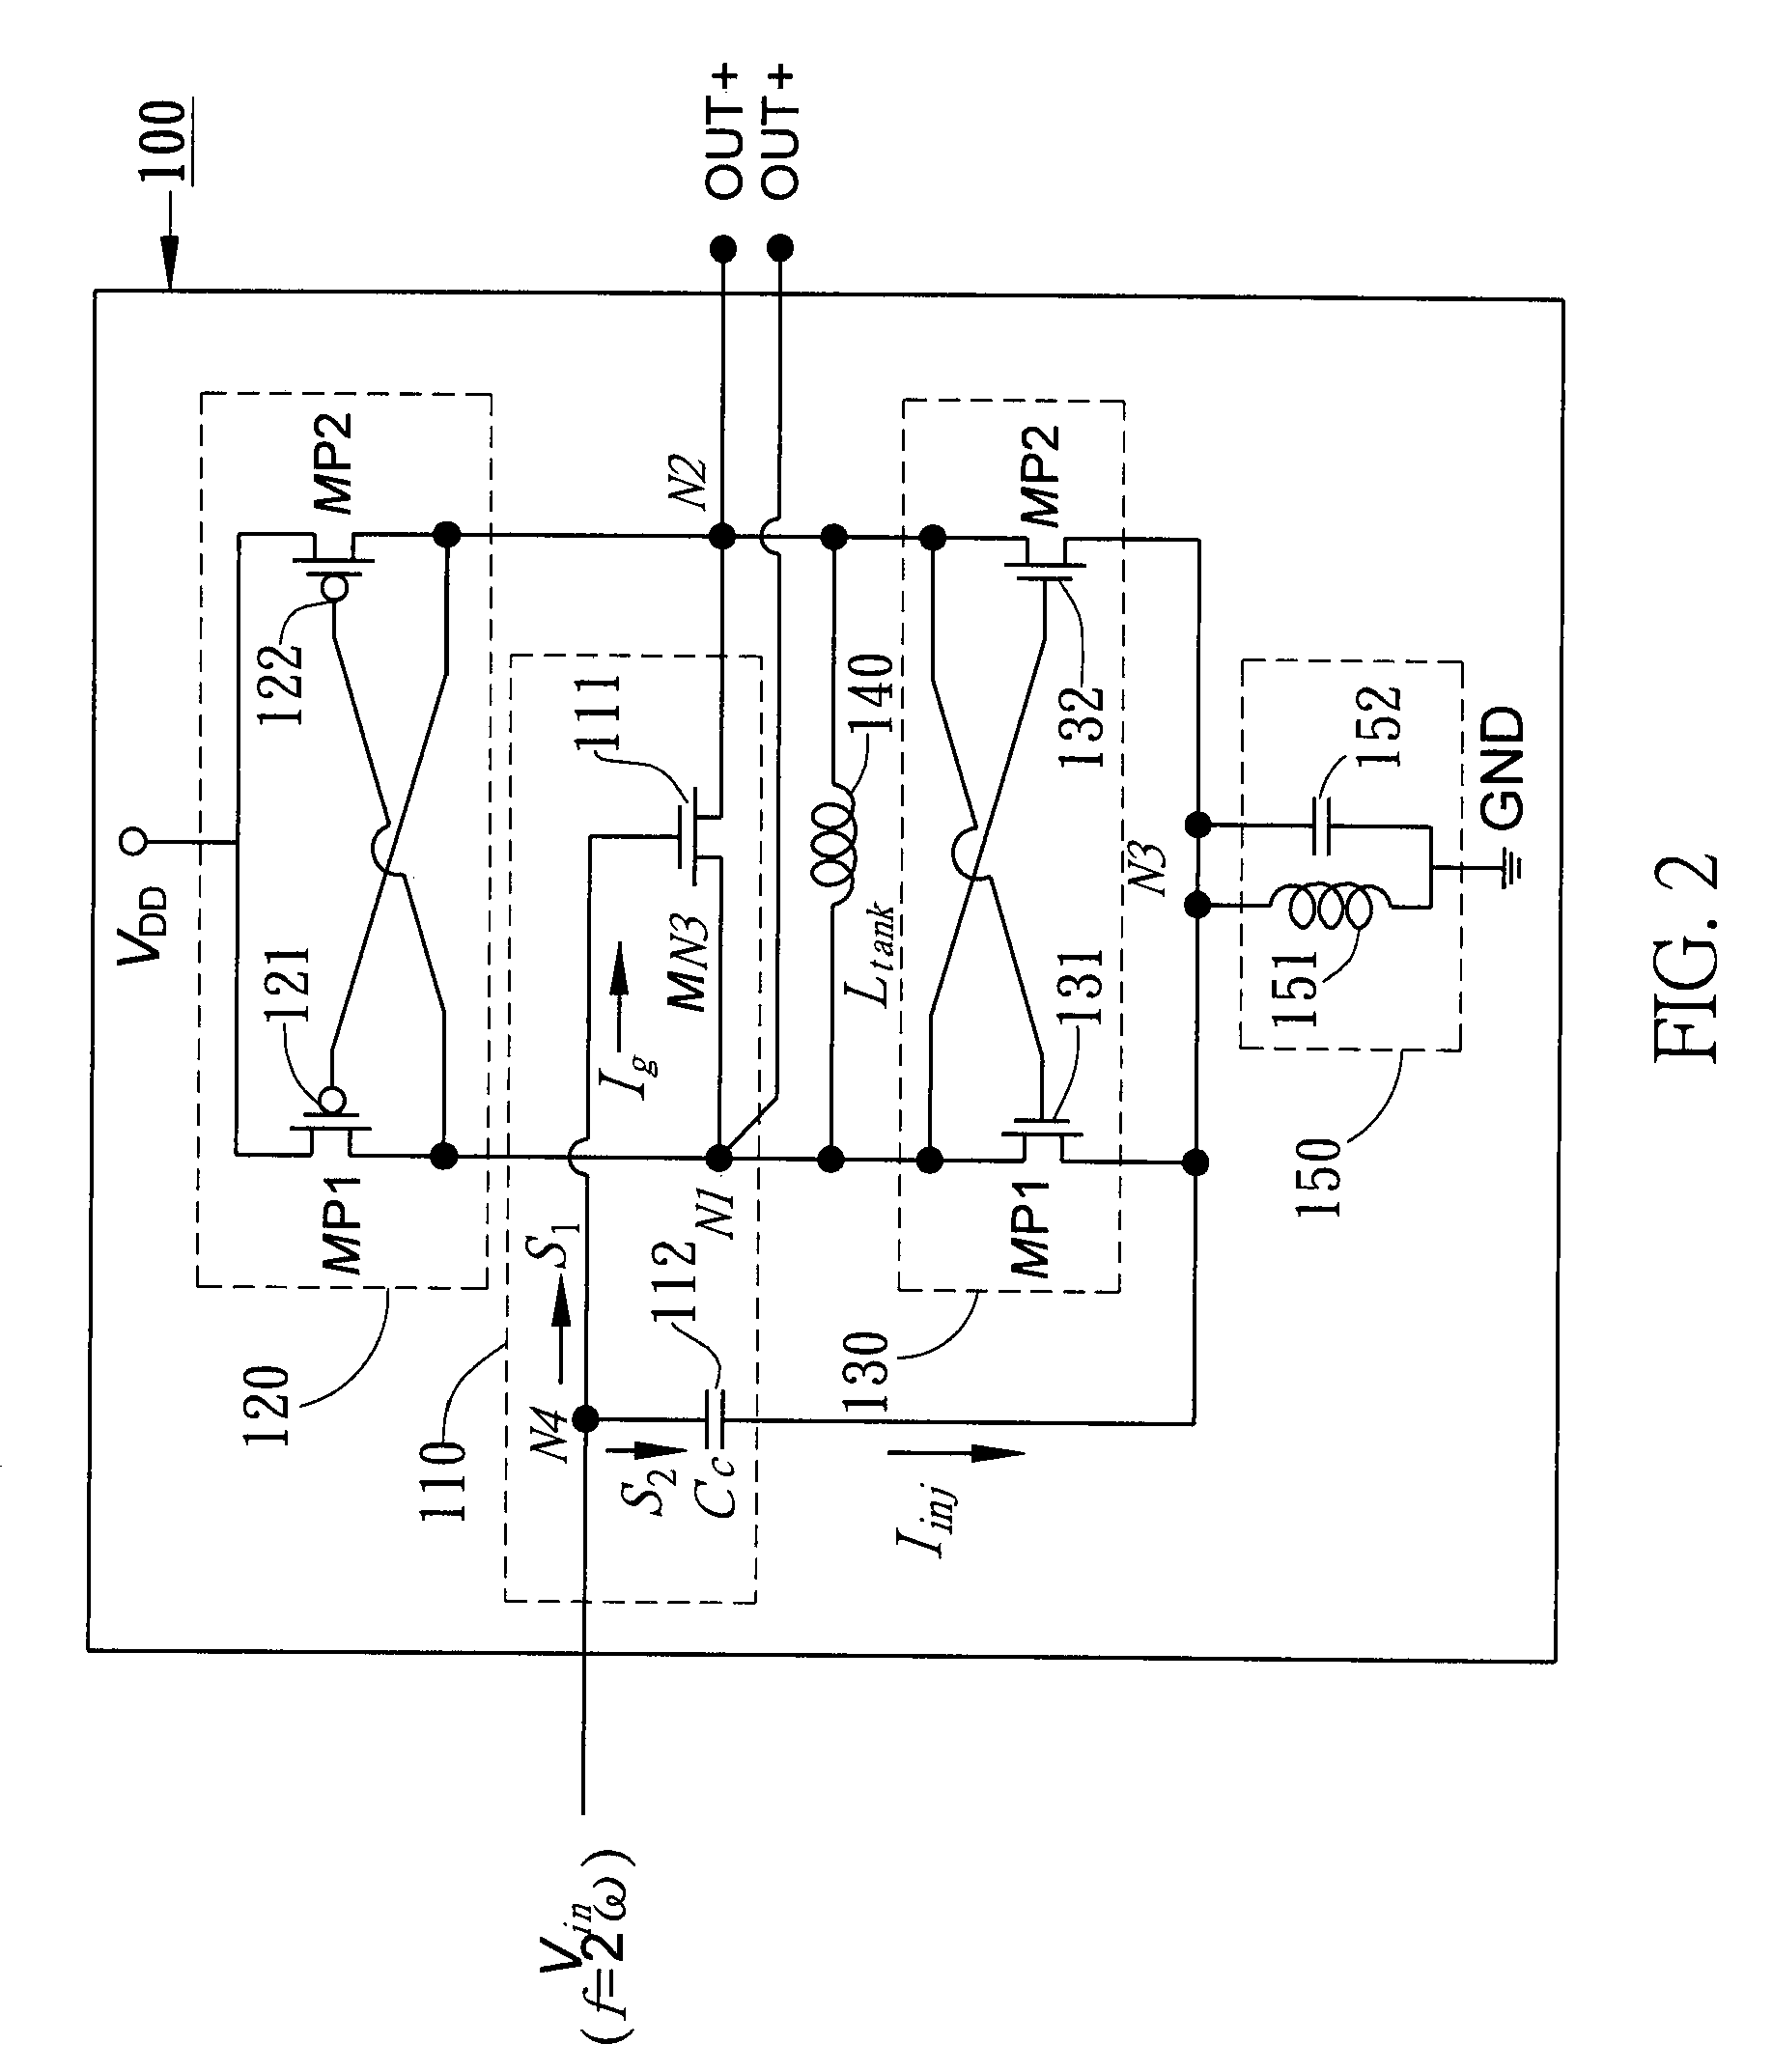 Dual-injection locked frequency dividing circuit